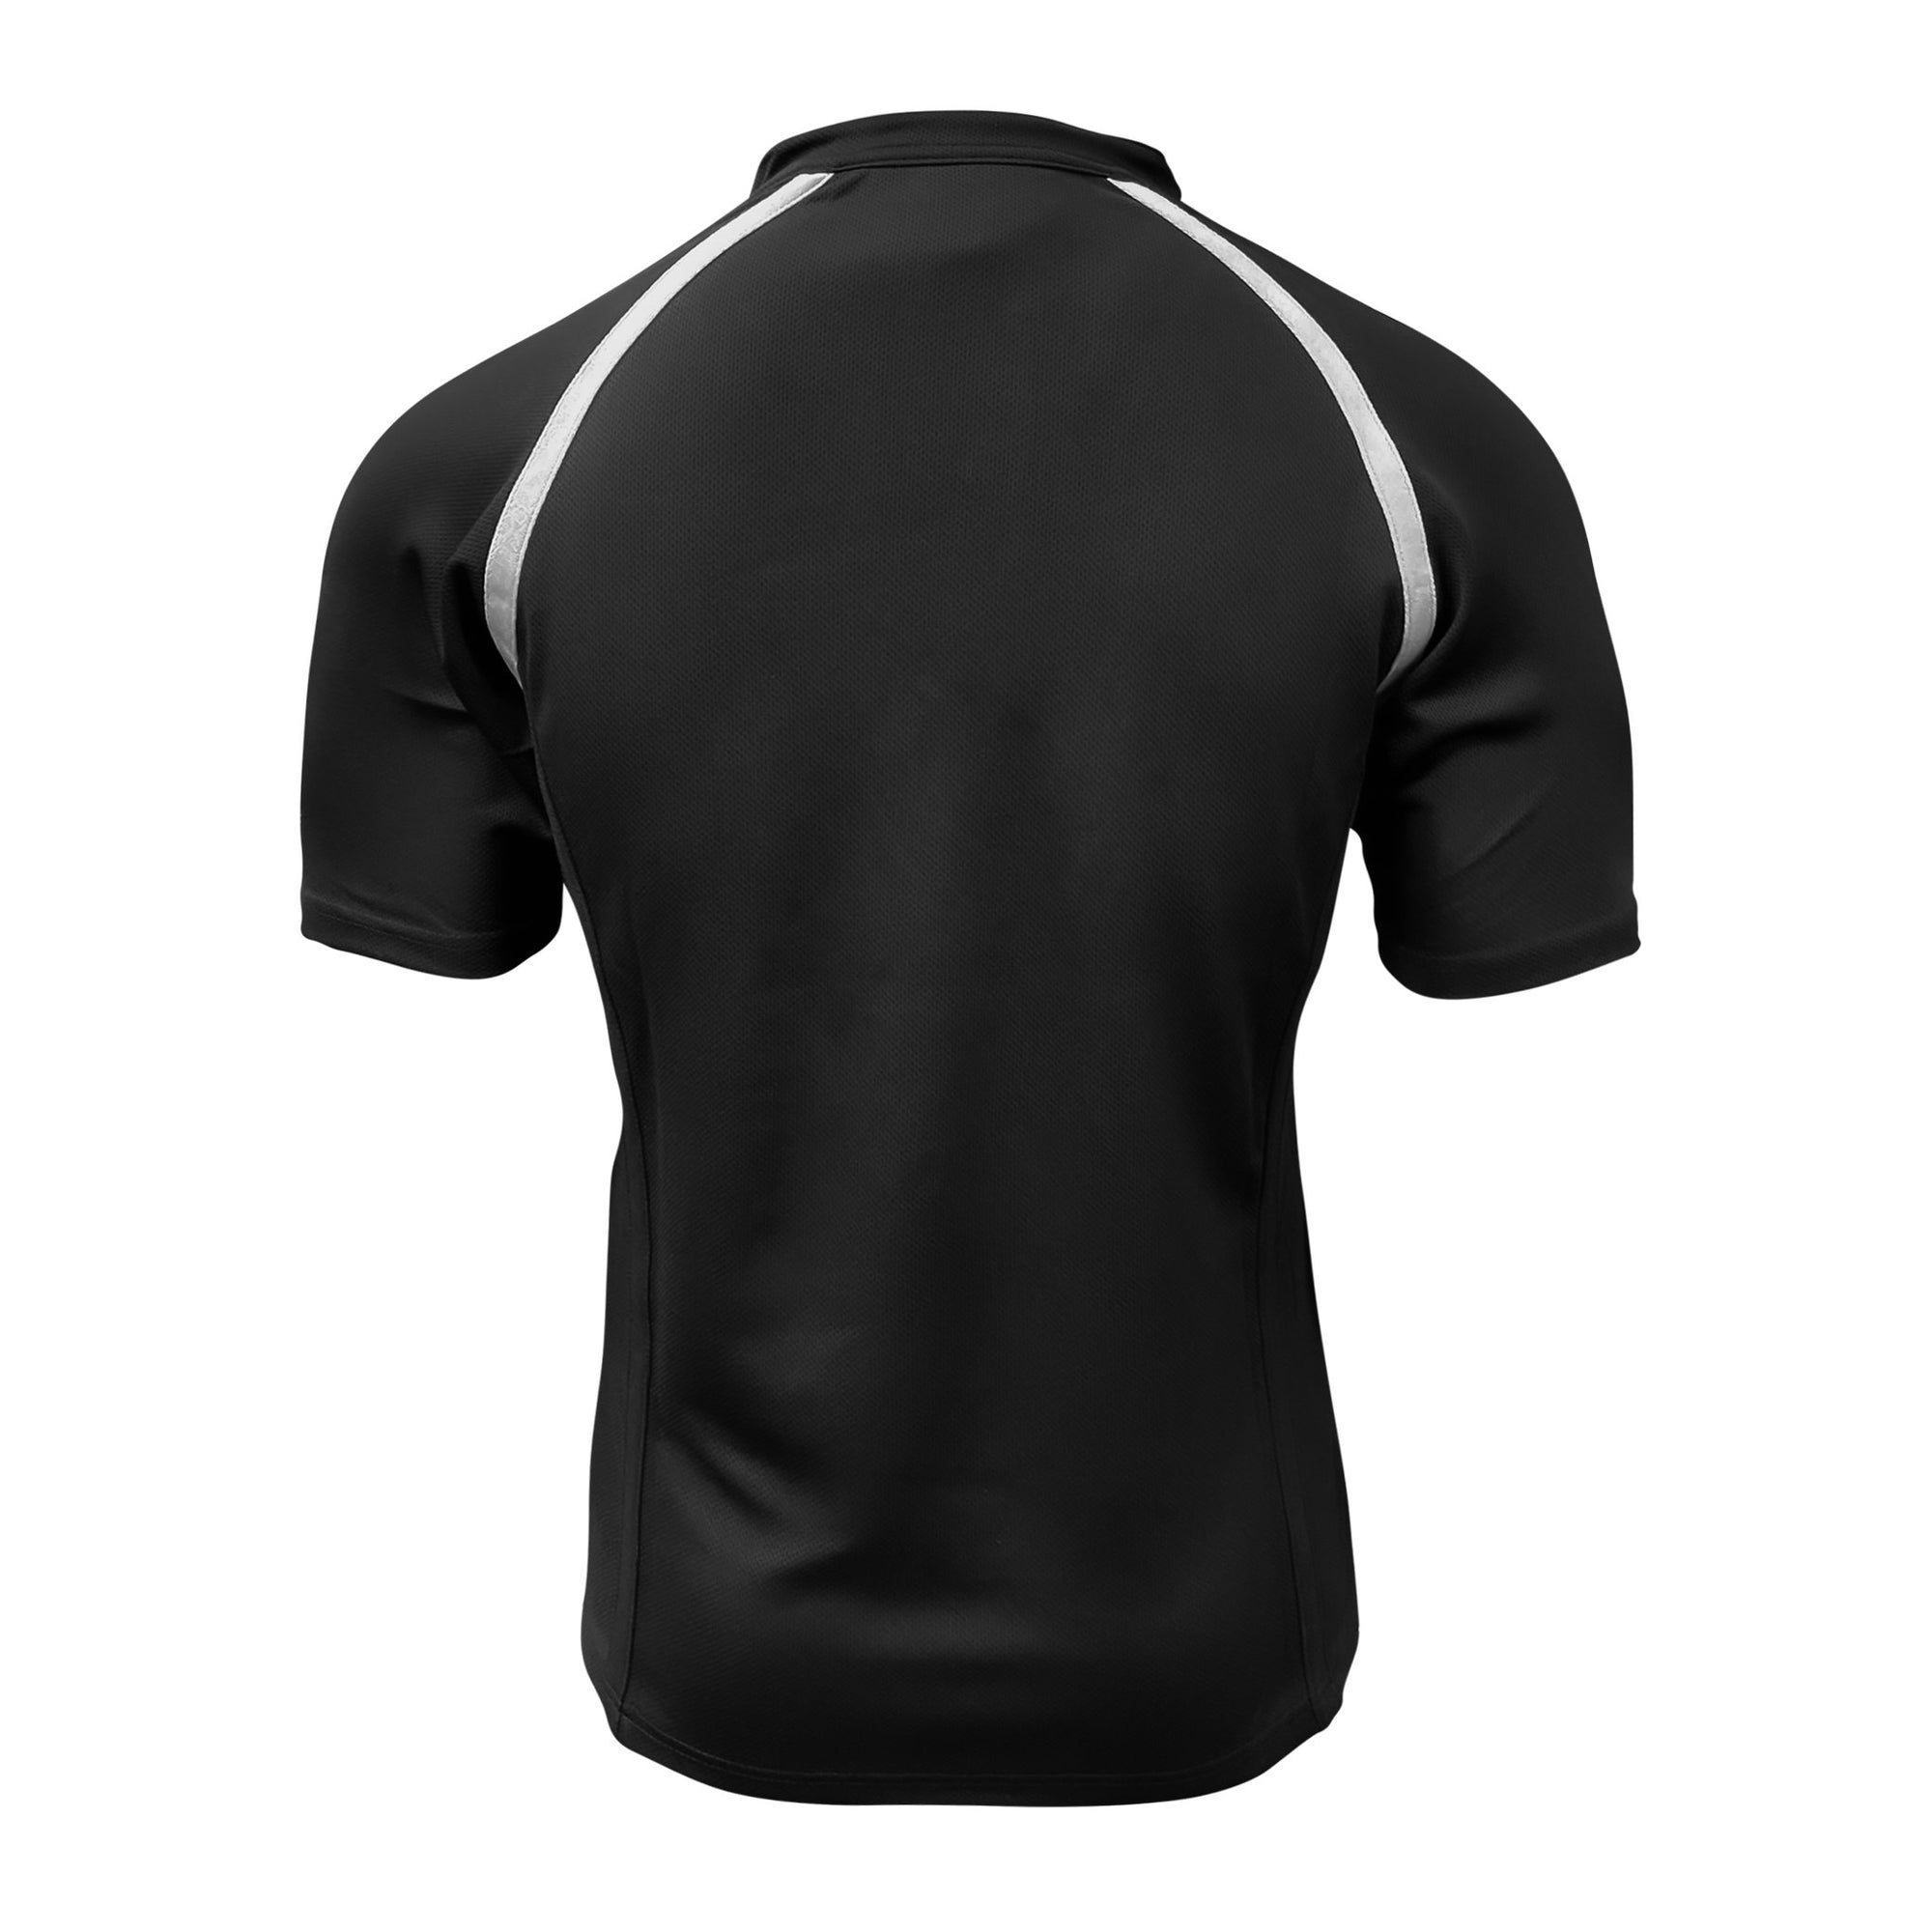 Rugby Imports Southern Pines Youth Rugby XACT II Jersey